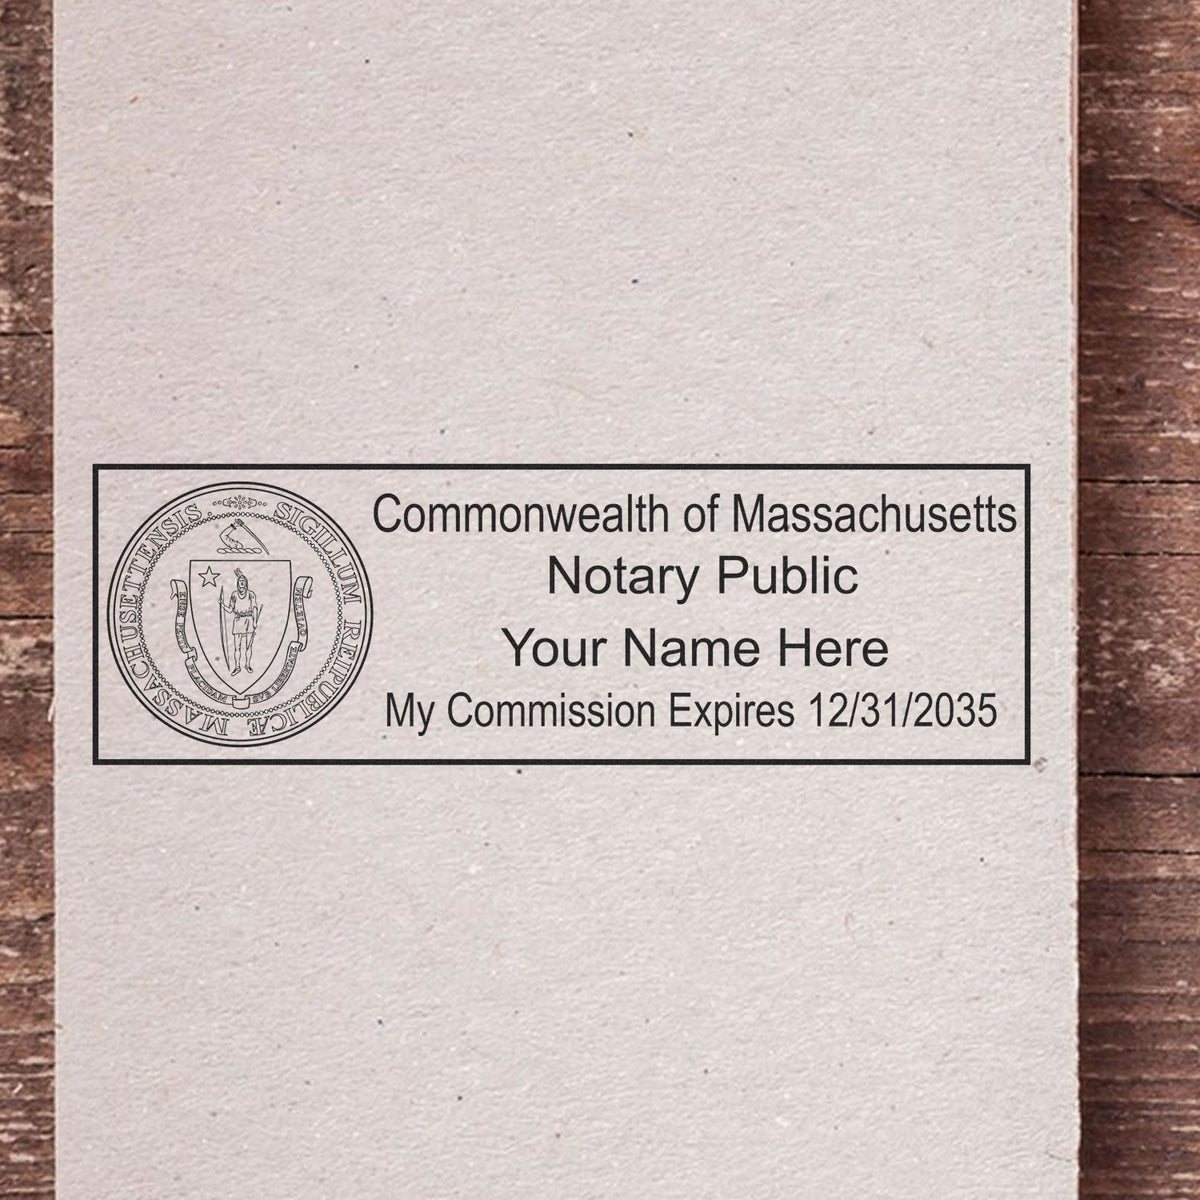 A photograph of the Heavy-Duty Massachusetts Rectangular Notary Stamp stamp impression reveals a vivid, professional image of the on paper.